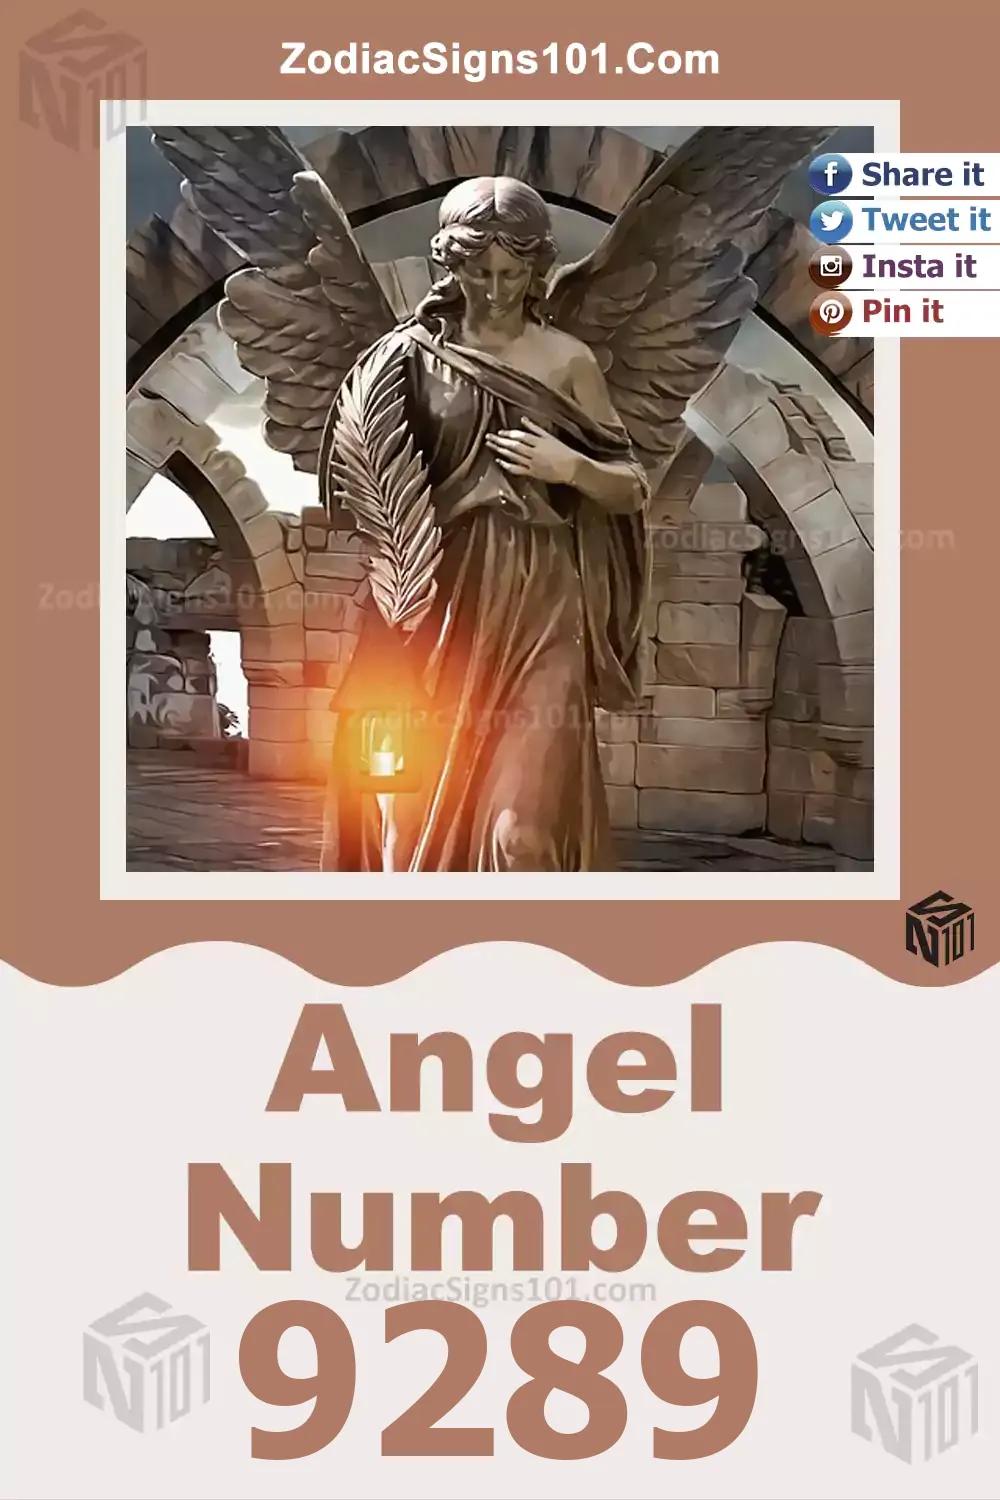 9289 Angel Number Meaning